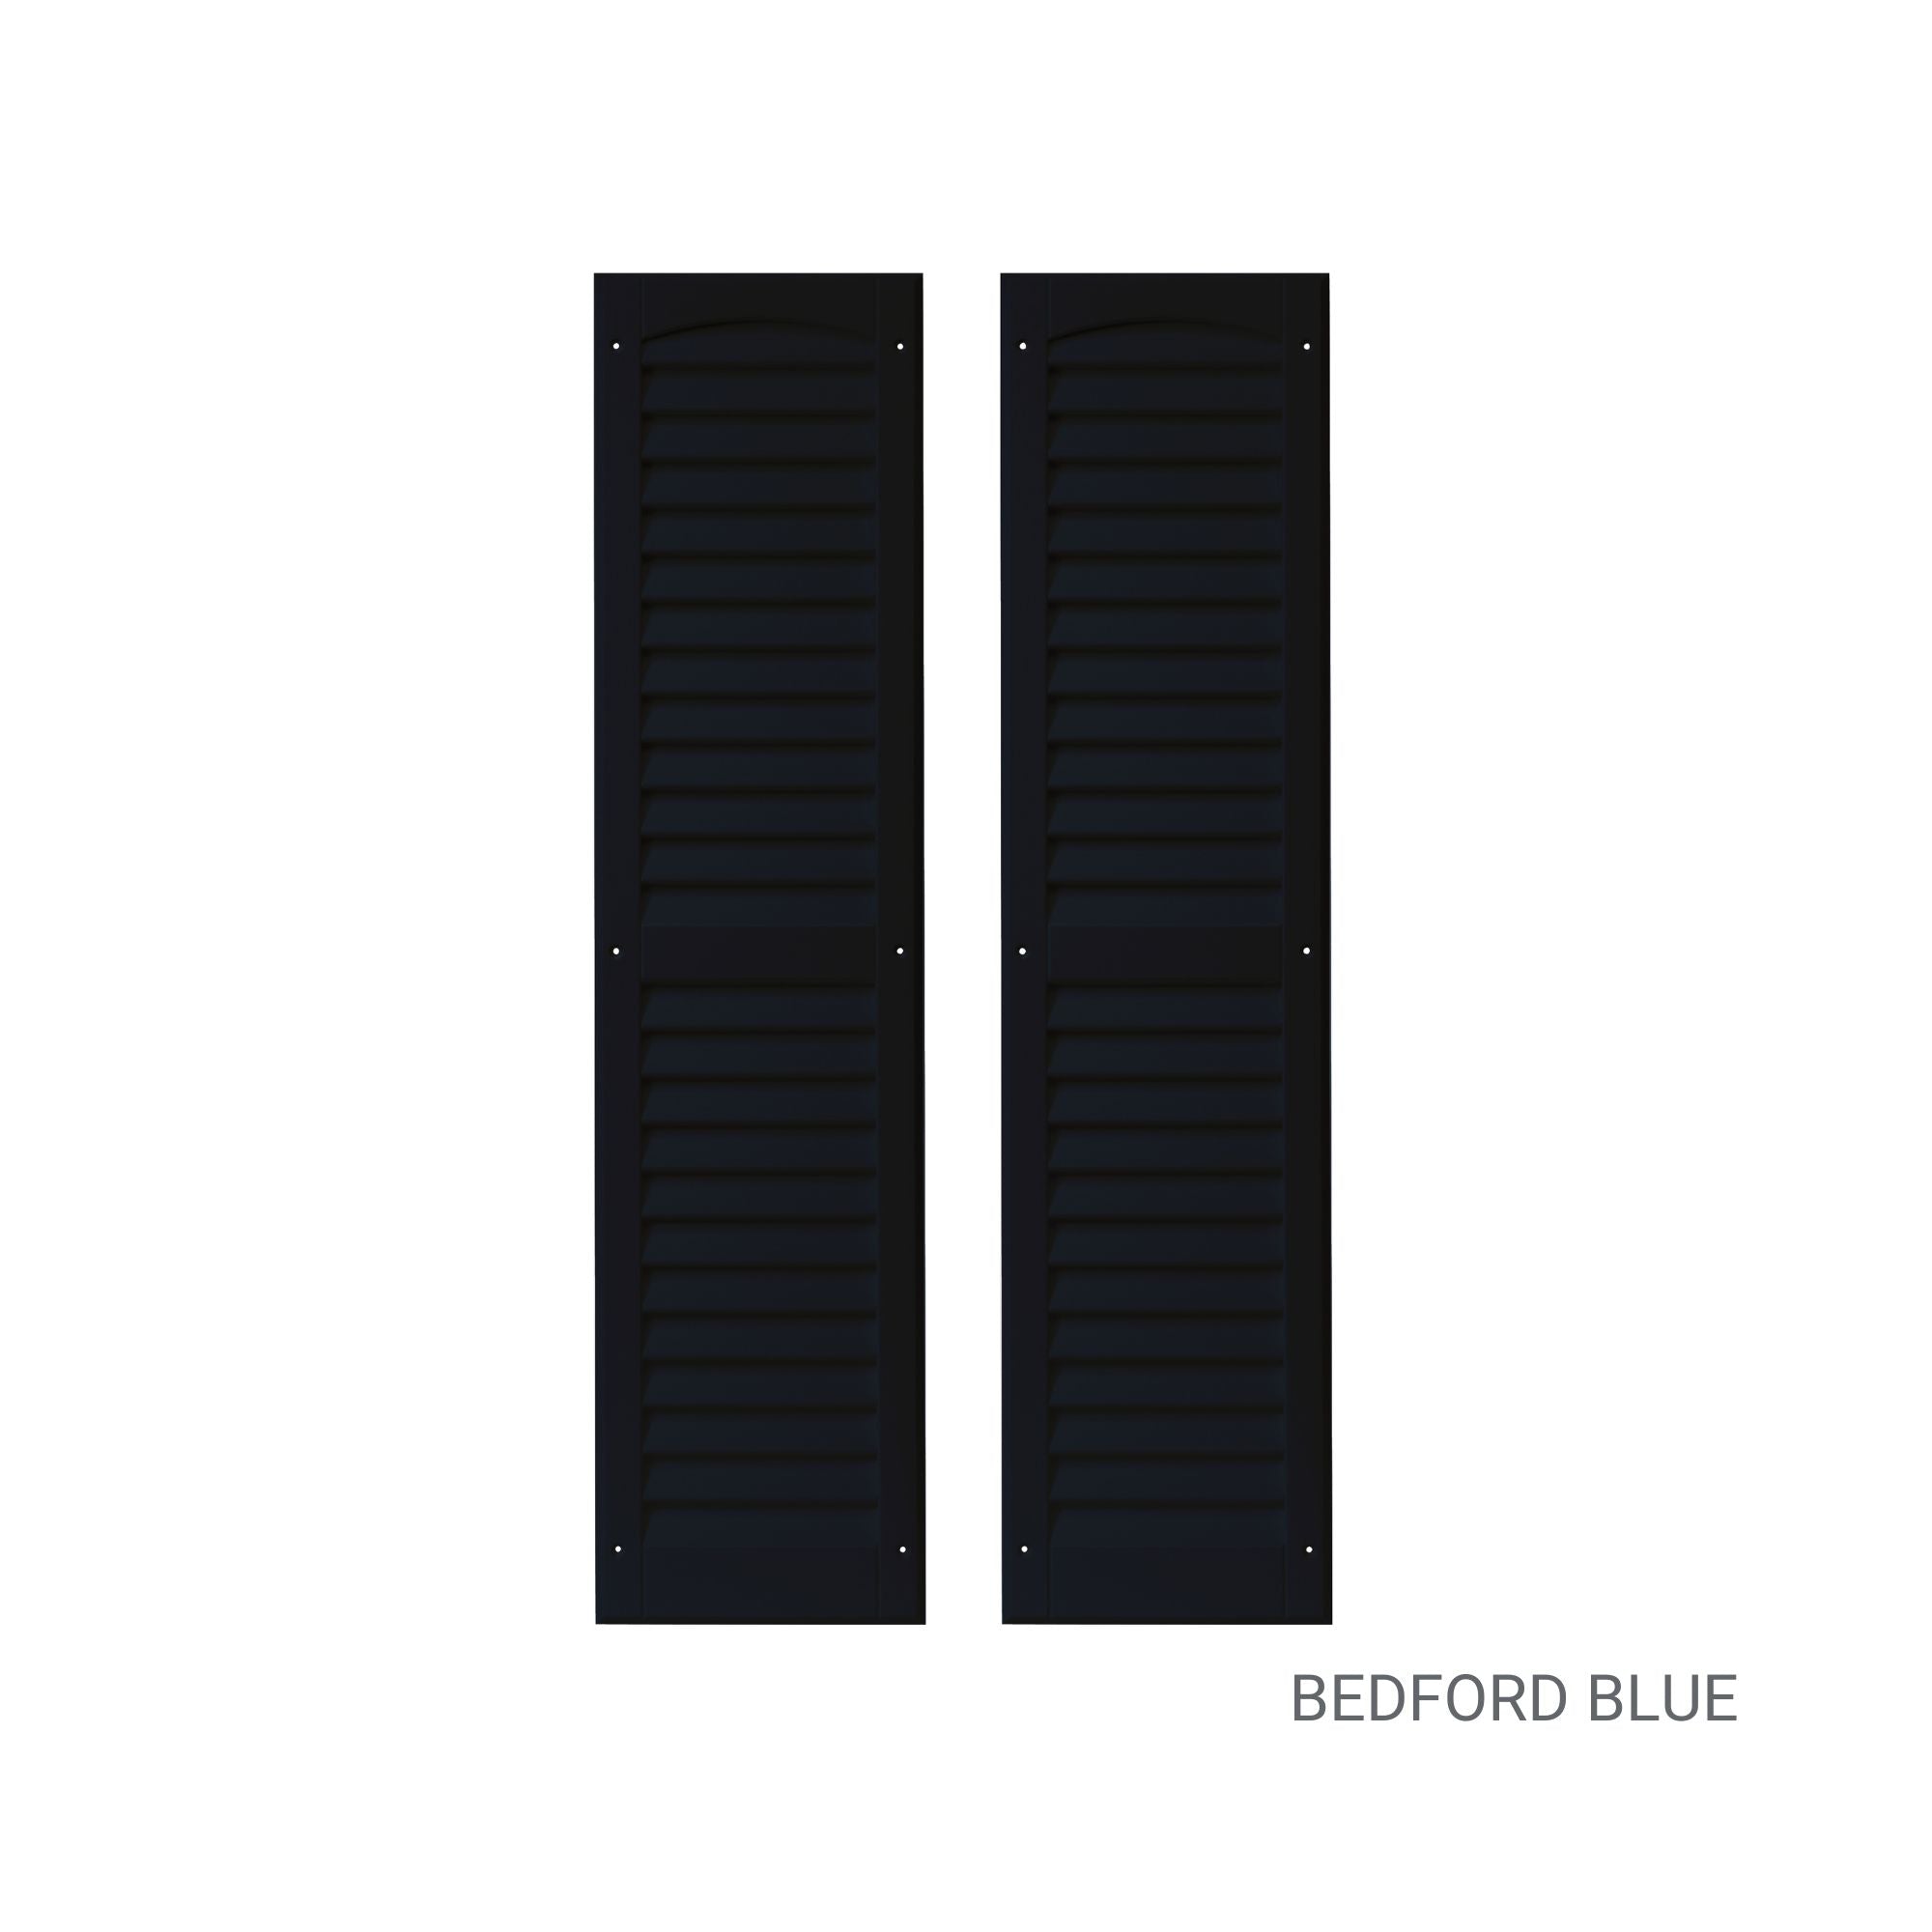 Pair of 9" W x 36" H Louvered Bedford Blue Shutters for Sheds, Playhouses, and MORE